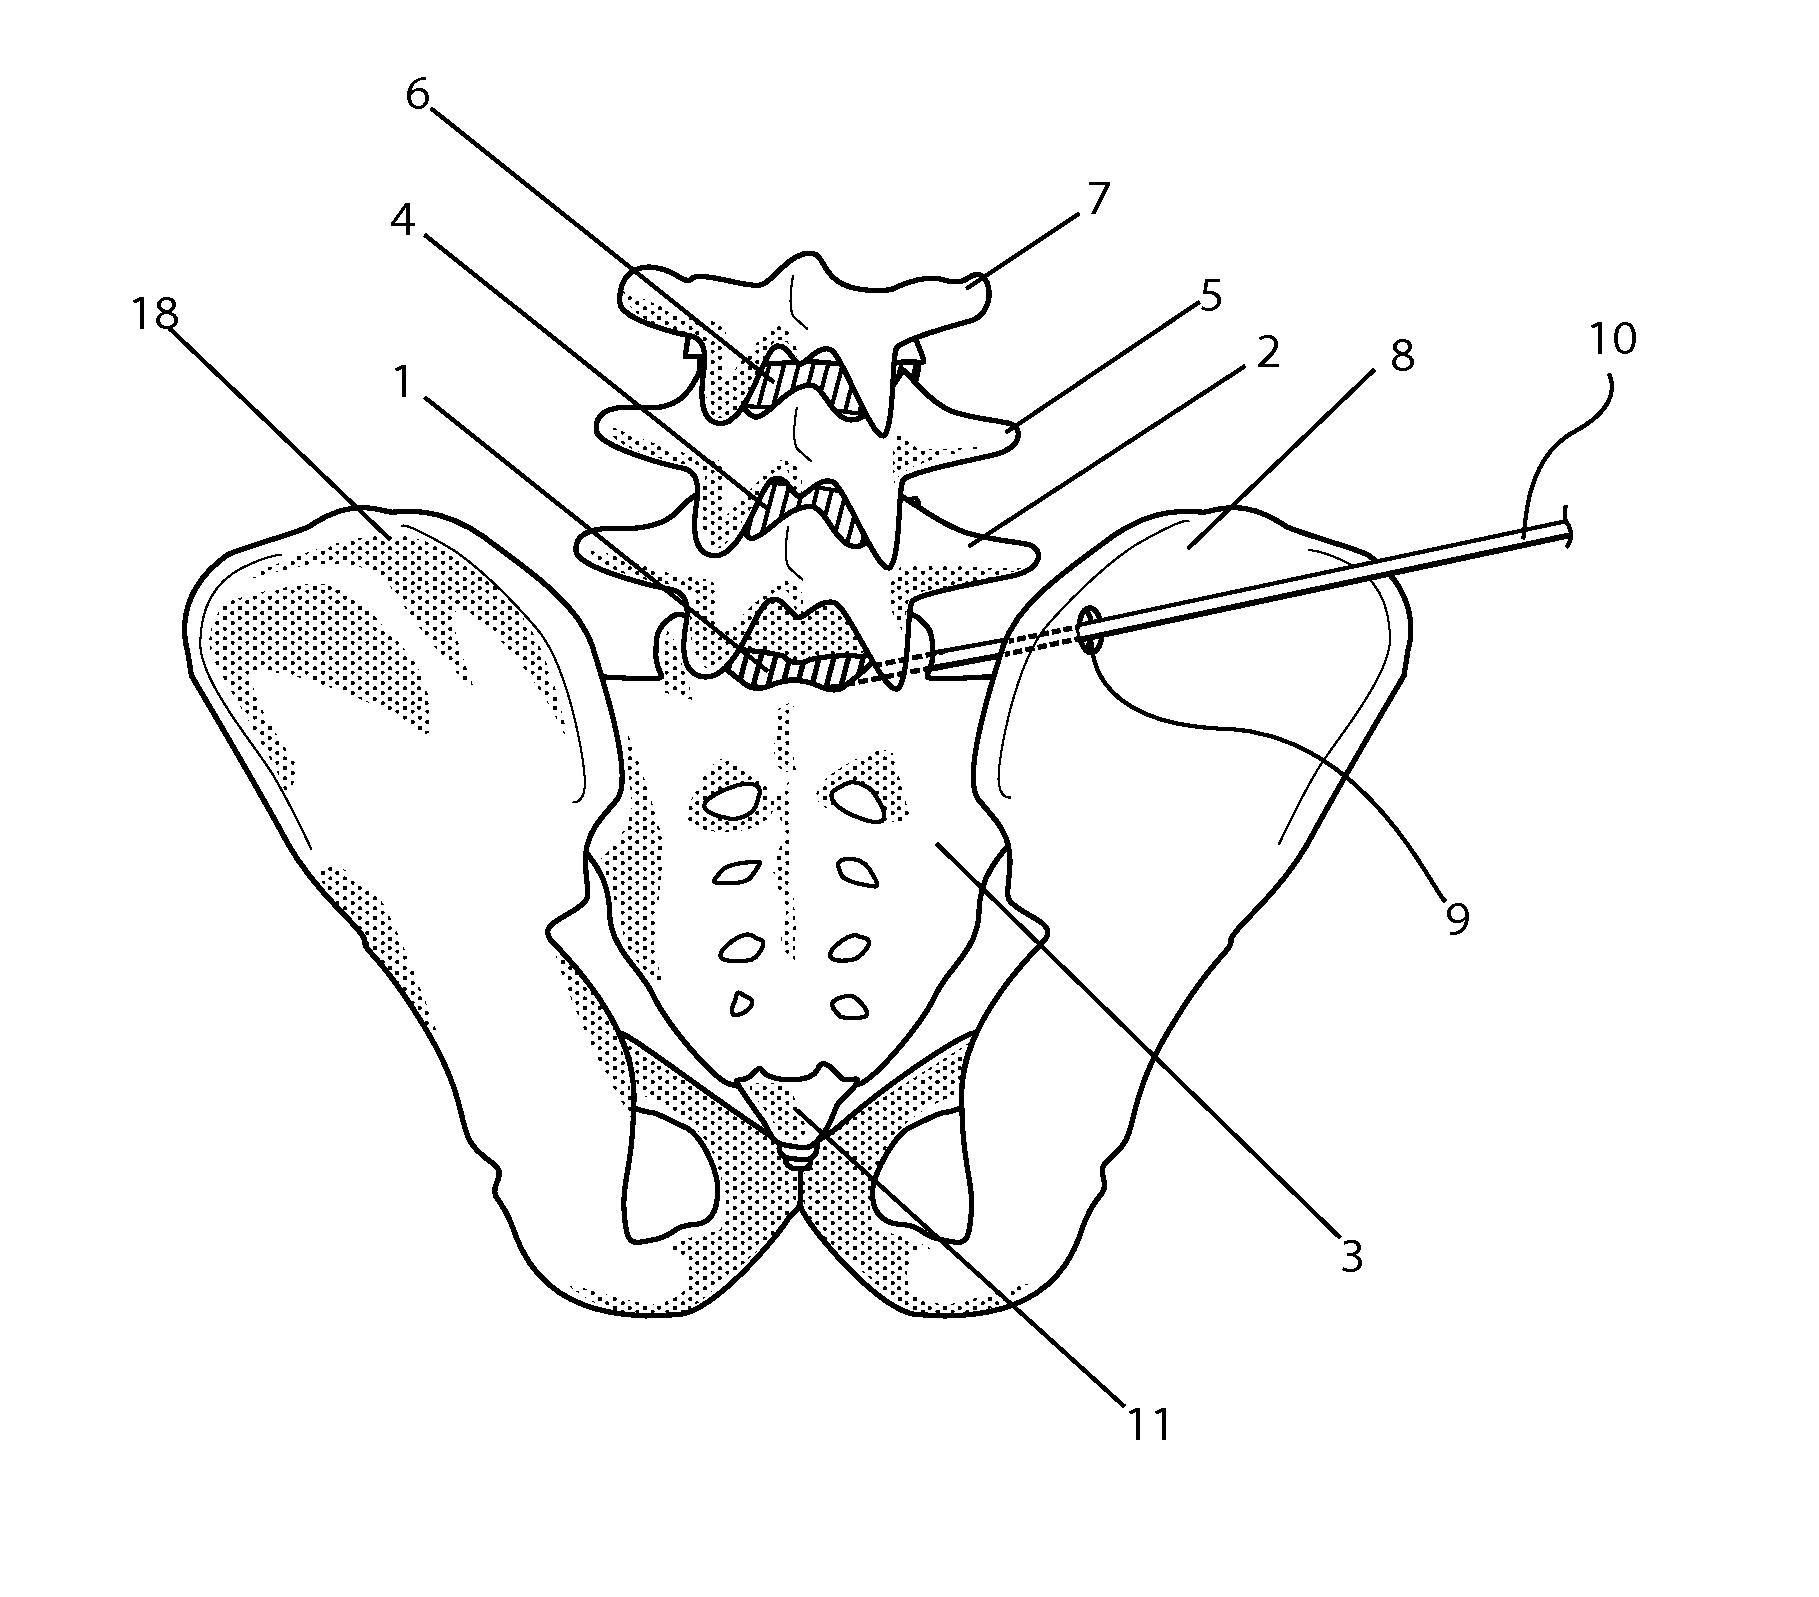 Trans-osseous oblique lumbosacral fusion system and method